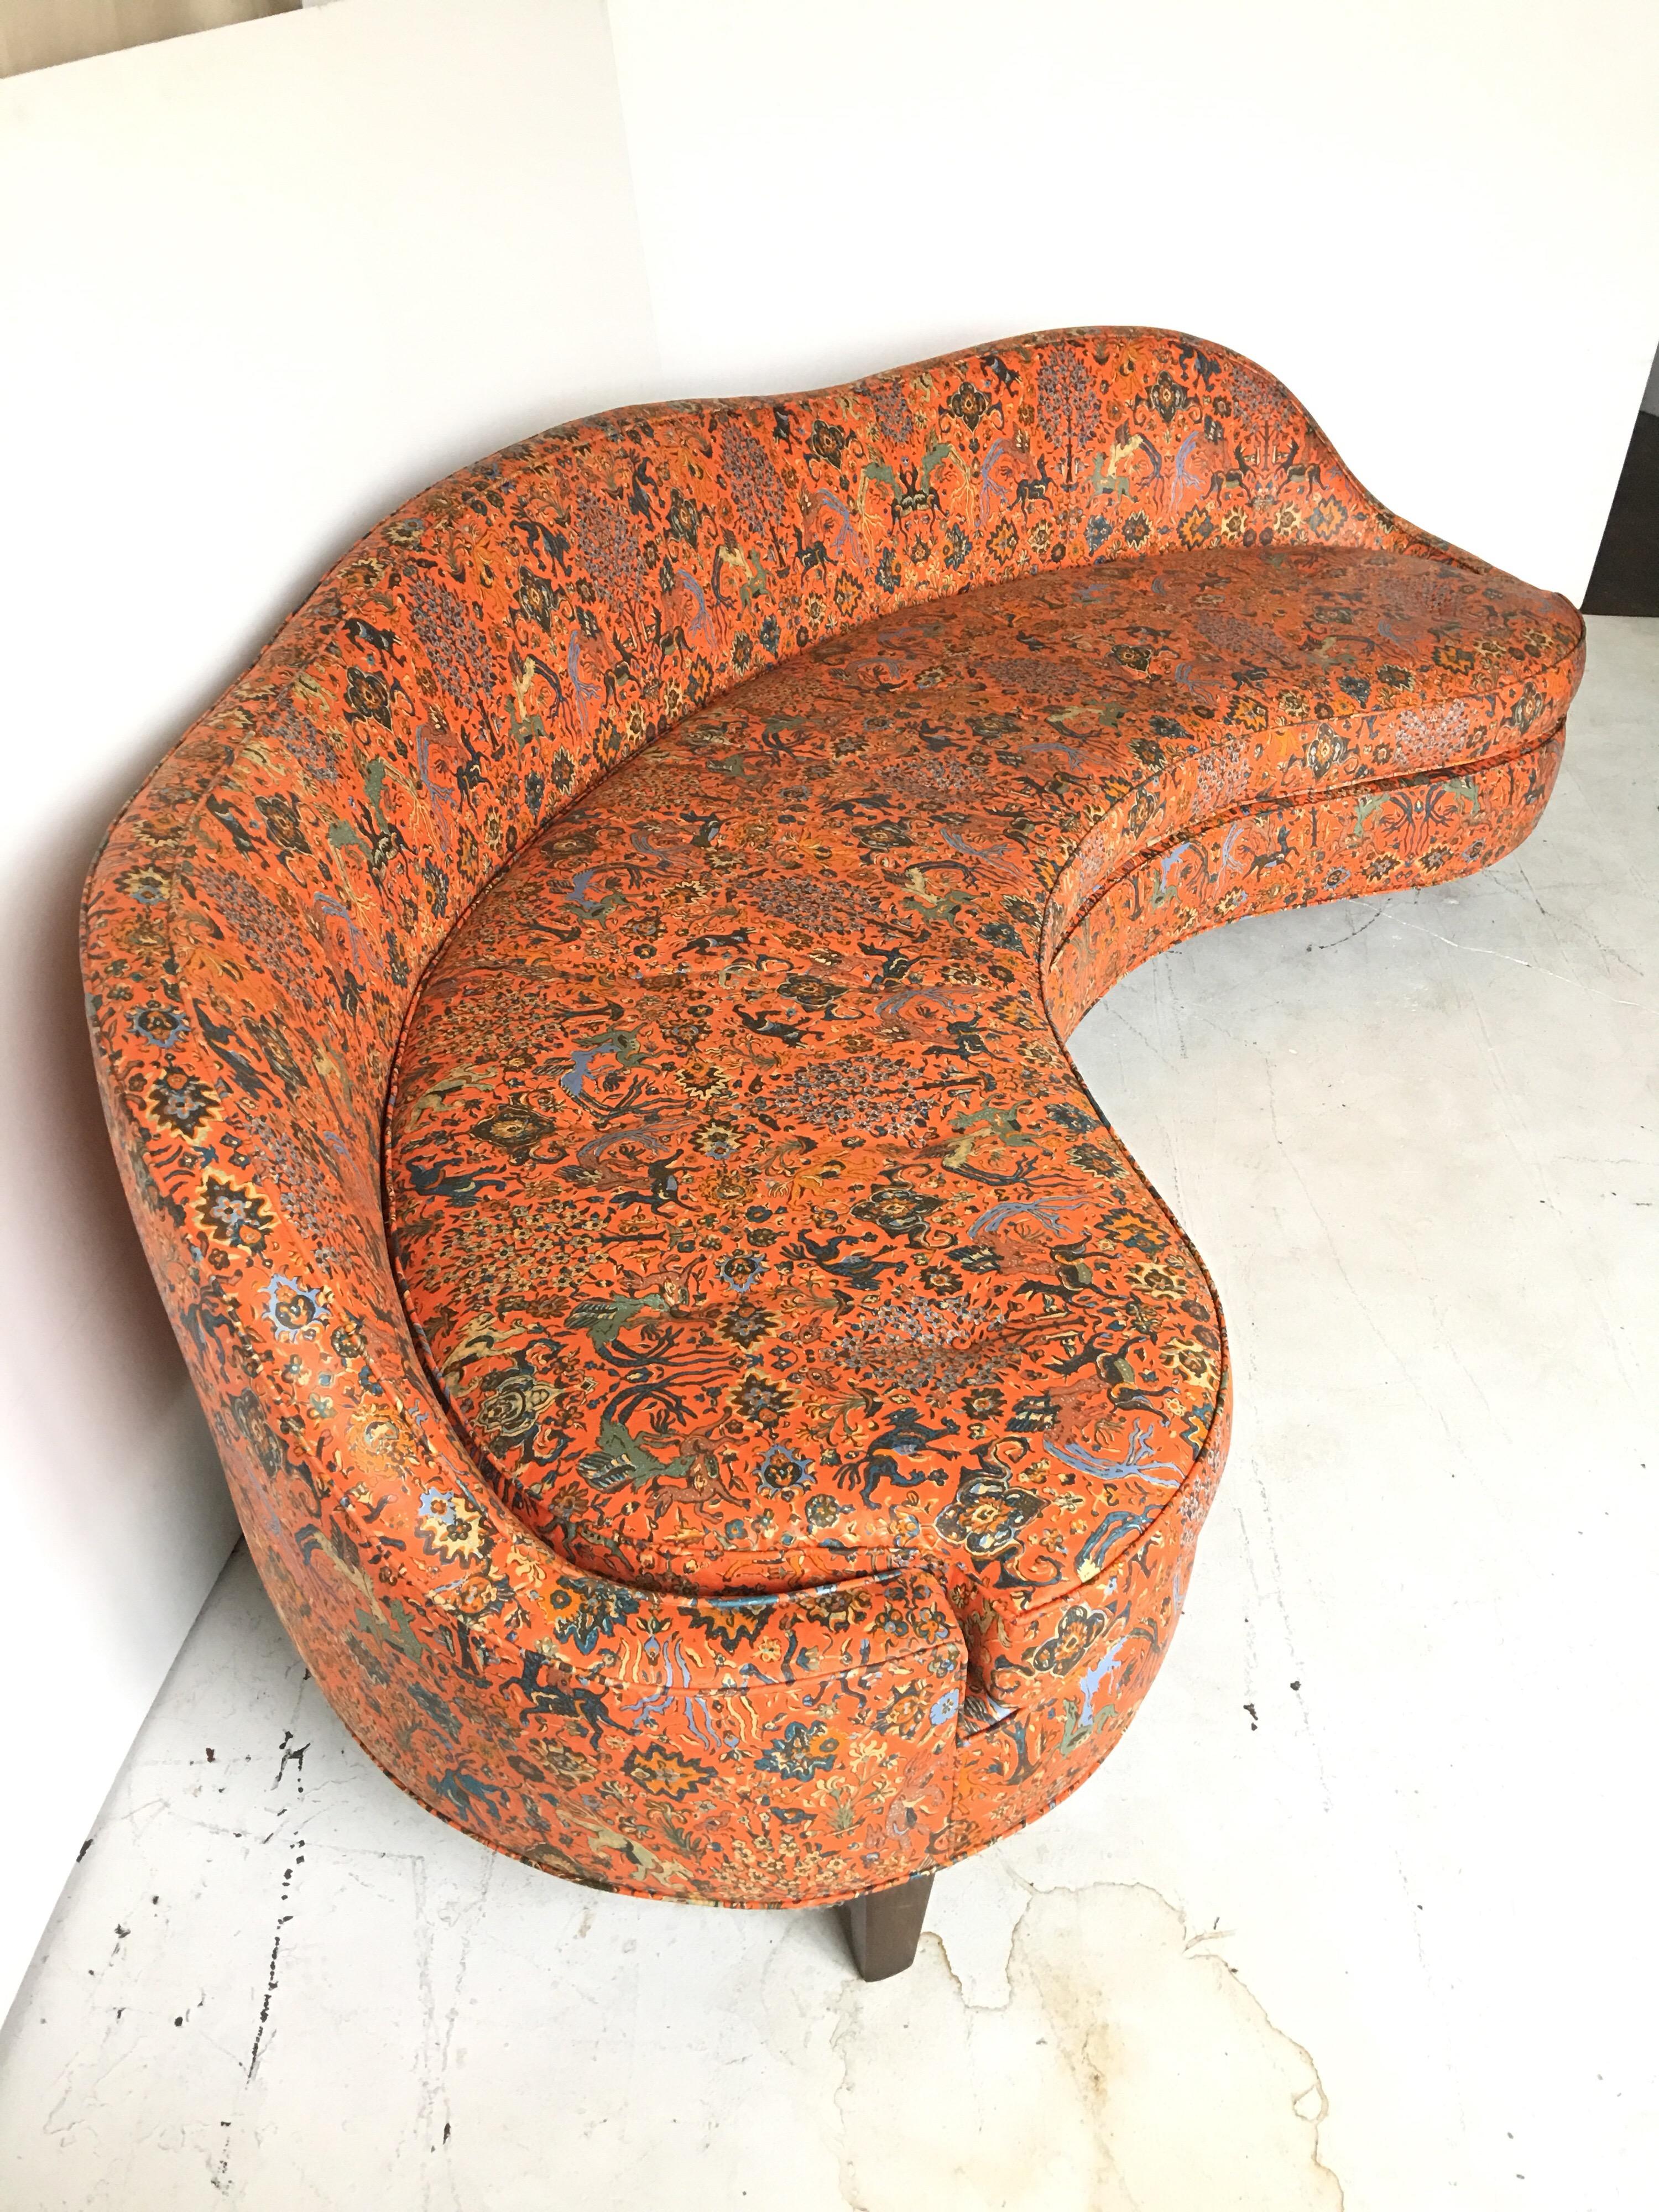 This is a very unusual example of a signed Dunbar curved sofa. It is very much in the manner of the 